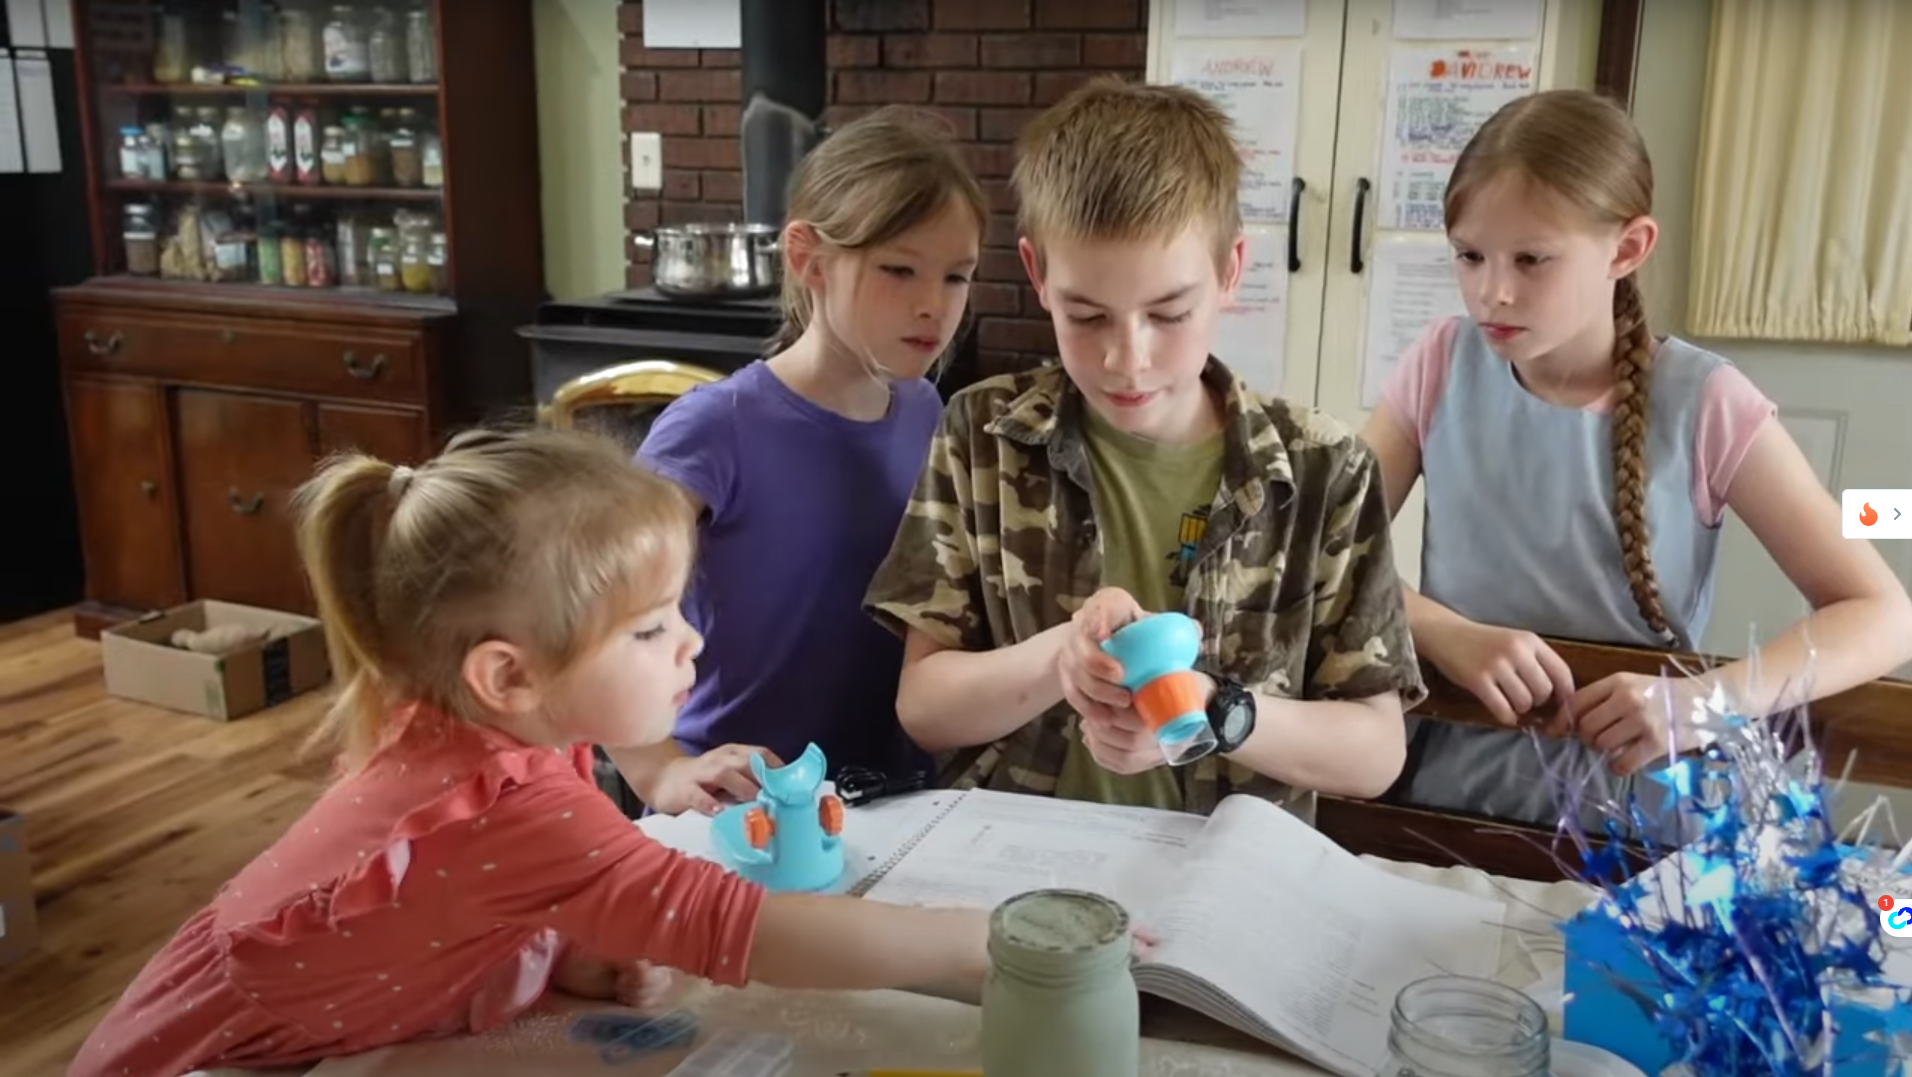 Load video: This video shows the APEXEL MS201 Woodpecker digital microscope for children to learn and explore the microscopic world